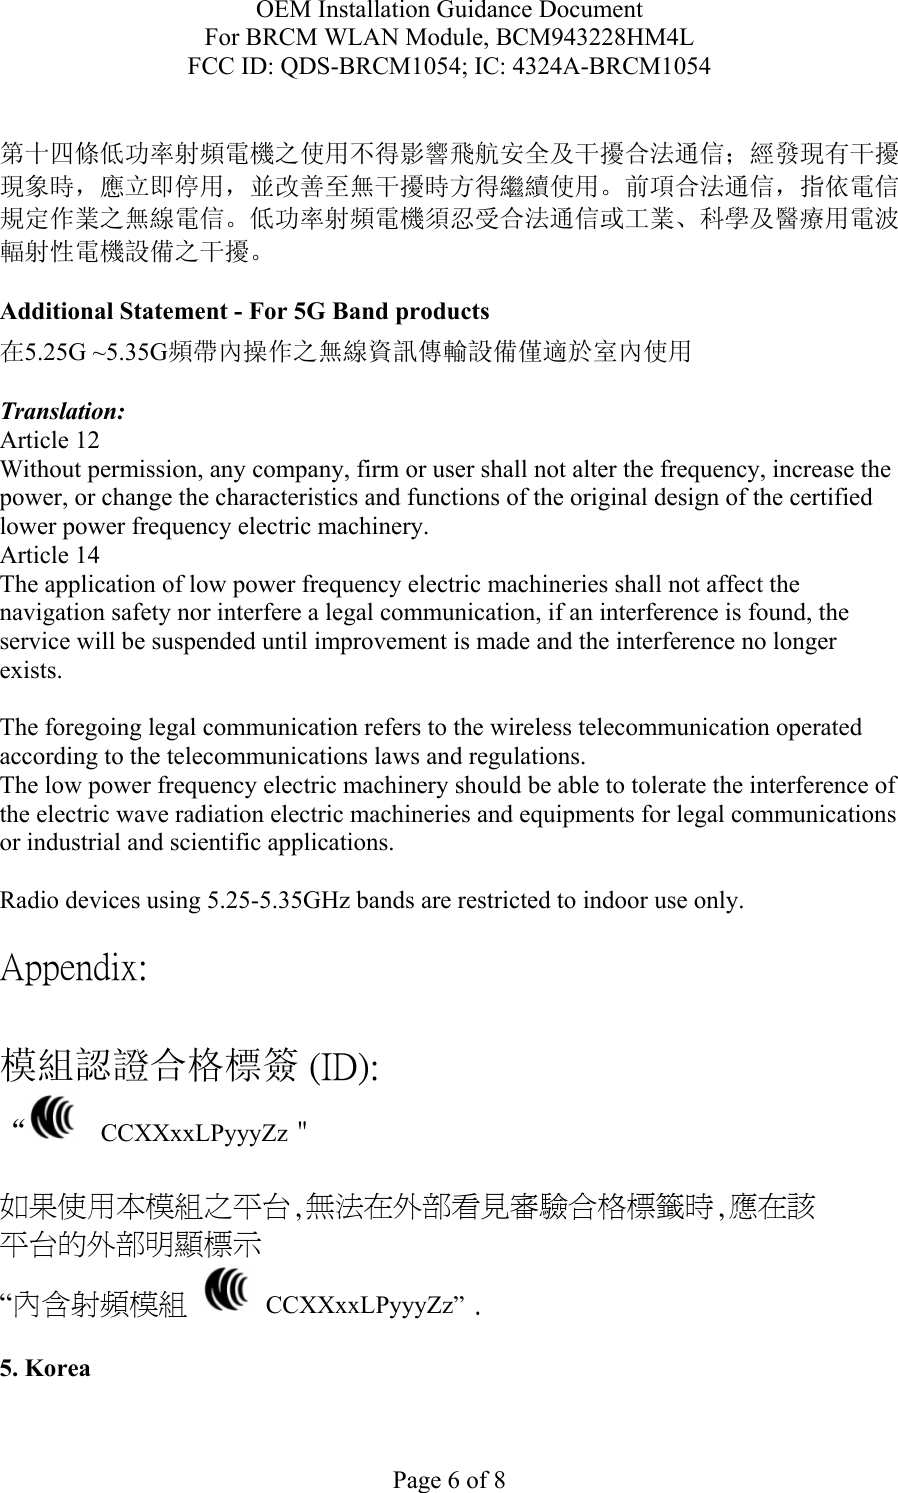 OEM Installation Guidance Document For BRCM WLAN Module, BCM943228HM4L FCC ID: QDS-BRCM1054; IC: 4324A-BRCM1054  Page 6 of 8  第十四條低功率射頻電機之使用不得影響飛航安全及干擾合法通信；經發現有干擾現象時，應立即停用，並改善至無干擾時方得繼續使用。前項合法通信，指依電信規定作業之無線電信。低功率射頻電機須忍受合法通信或工業、科學及醫療用電波輻射性電機設備之干擾。  Additional Statement - For 5G Band products 在5.25G ~5.35G頻帶內操作之無線資訊傳輸設備僅適於室內使用  Translation: Article 12 Without permission, any company, firm or user shall not alter the frequency, increase the power, or change the characteristics and functions of the original design of the certified lower power frequency electric machinery. Article 14 The application of low power frequency electric machineries shall not affect the navigation safety nor interfere a legal communication, if an interference is found, the service will be suspended until improvement is made and the interference no longer exists.  The foregoing legal communication refers to the wireless telecommunication operated according to the telecommunications laws and regulations. The low power frequency electric machinery should be able to tolerate the interference of the electric wave radiation electric machineries and equipments for legal communications or industrial and scientific applications.  Radio devices using 5.25-5.35GHz bands are restricted to indoor use only.  Appendix:  模組認證合格標簽 (ID): “   CCXXxxLPyyyZz＂  如果使用本模組之平台,無法在外部看見審驗合格標籤時,應在該 平台的外部明顯標示 “內含射頻模組   CCXXxxLPyyyZz” .  5. Korea  